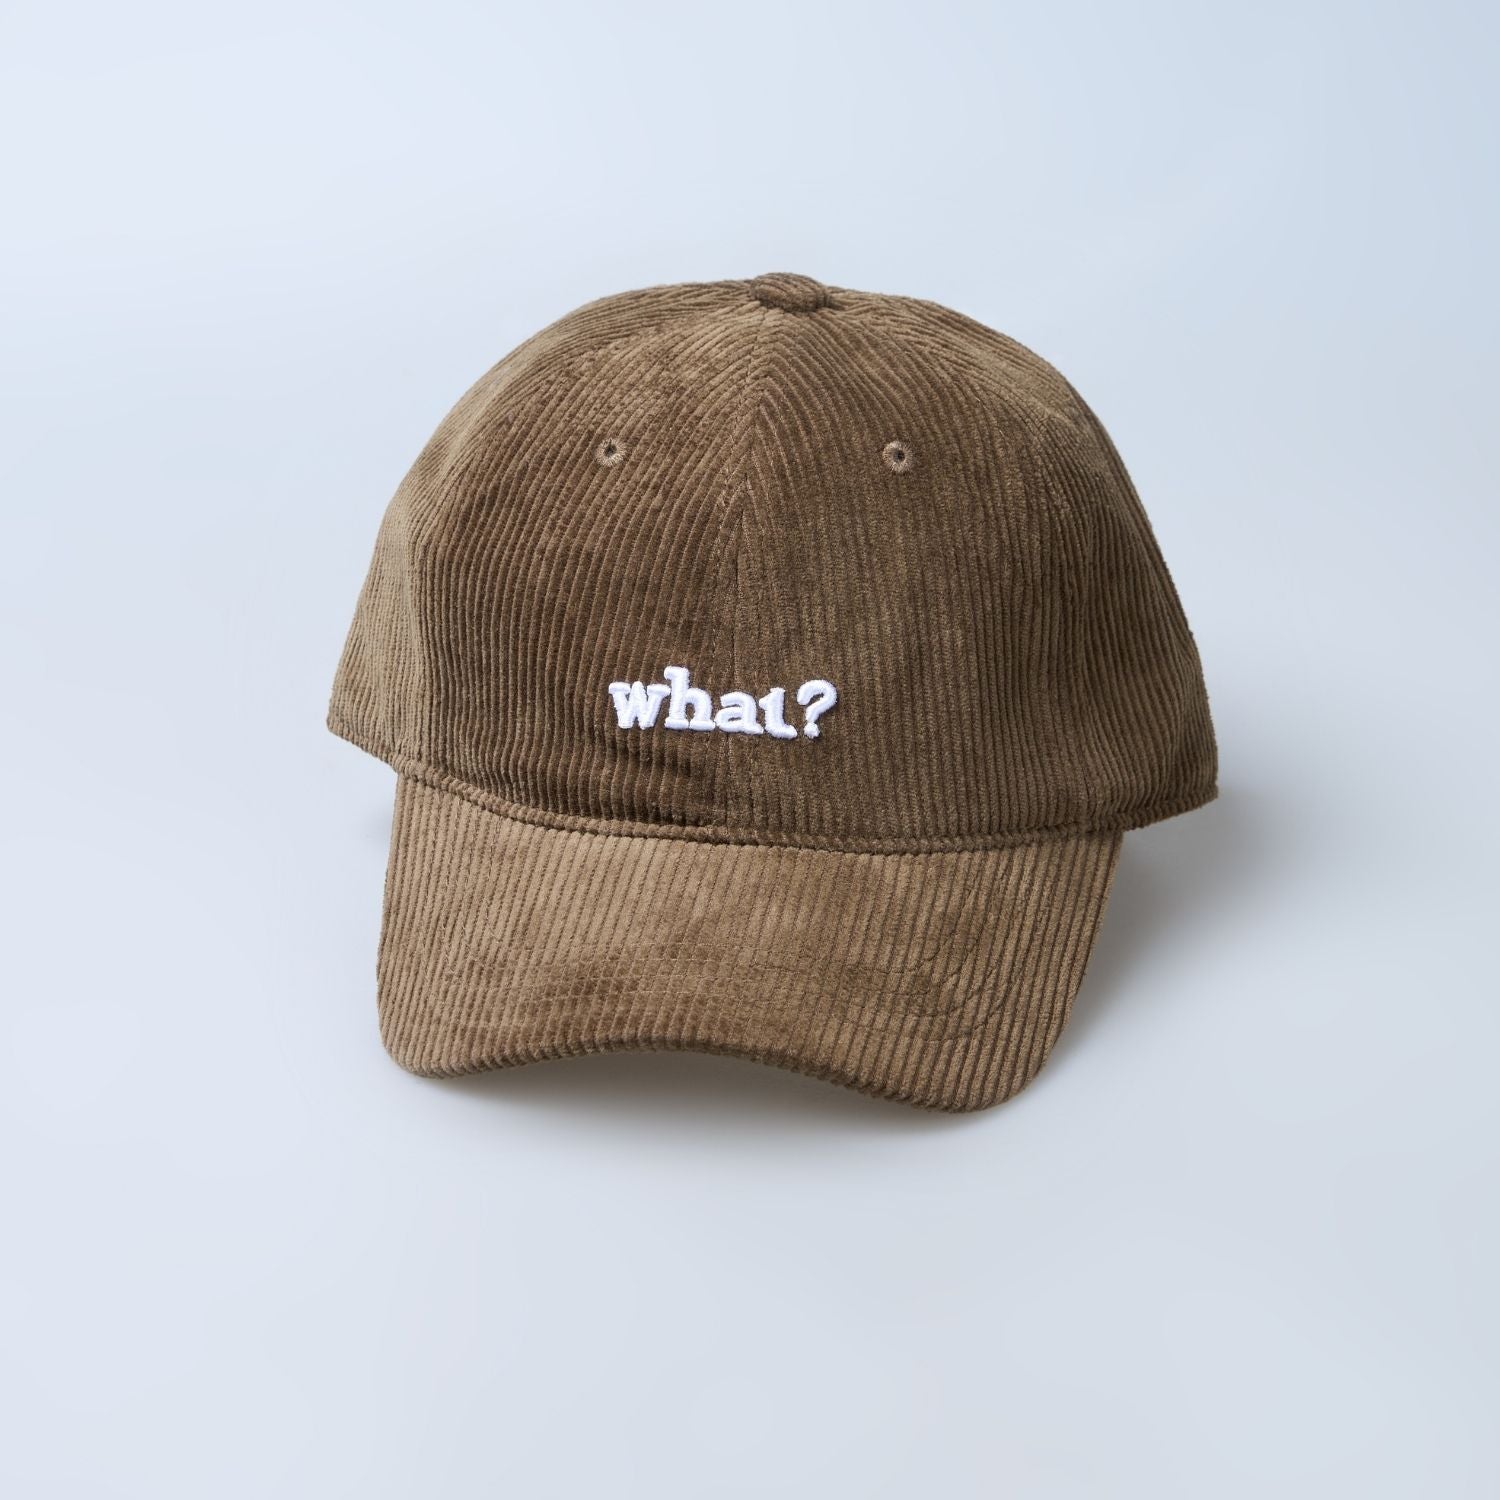 Brown colored cap for men with 'what' text written on it, front view.